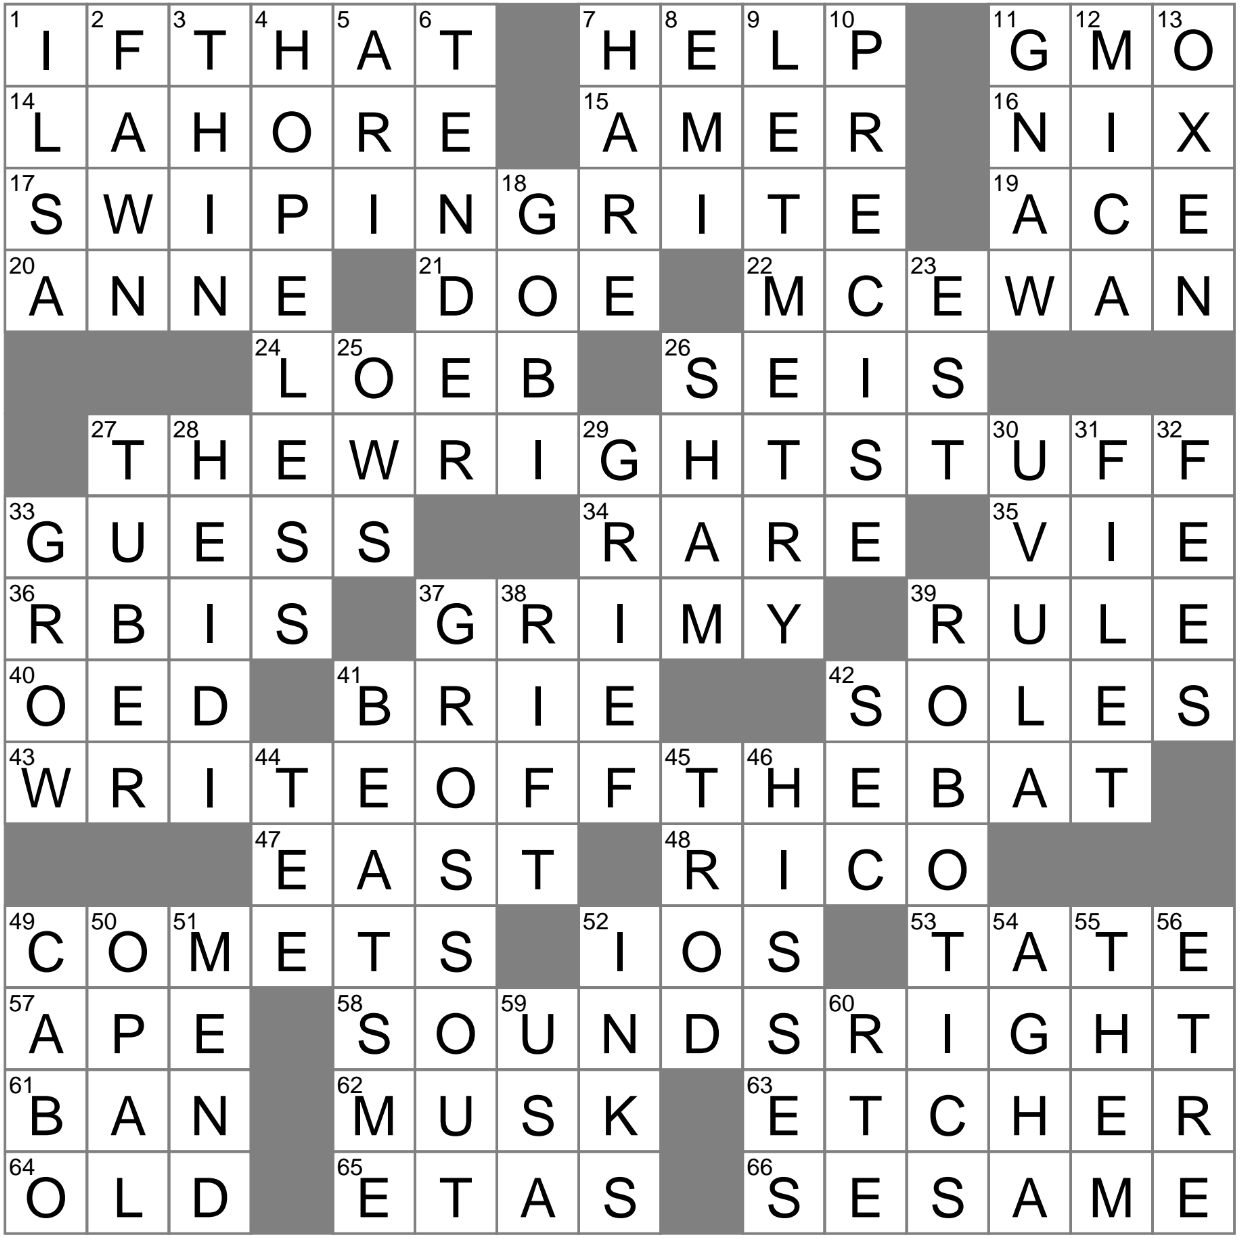 warmhearted-crossword-clue-archives-laxcrossword